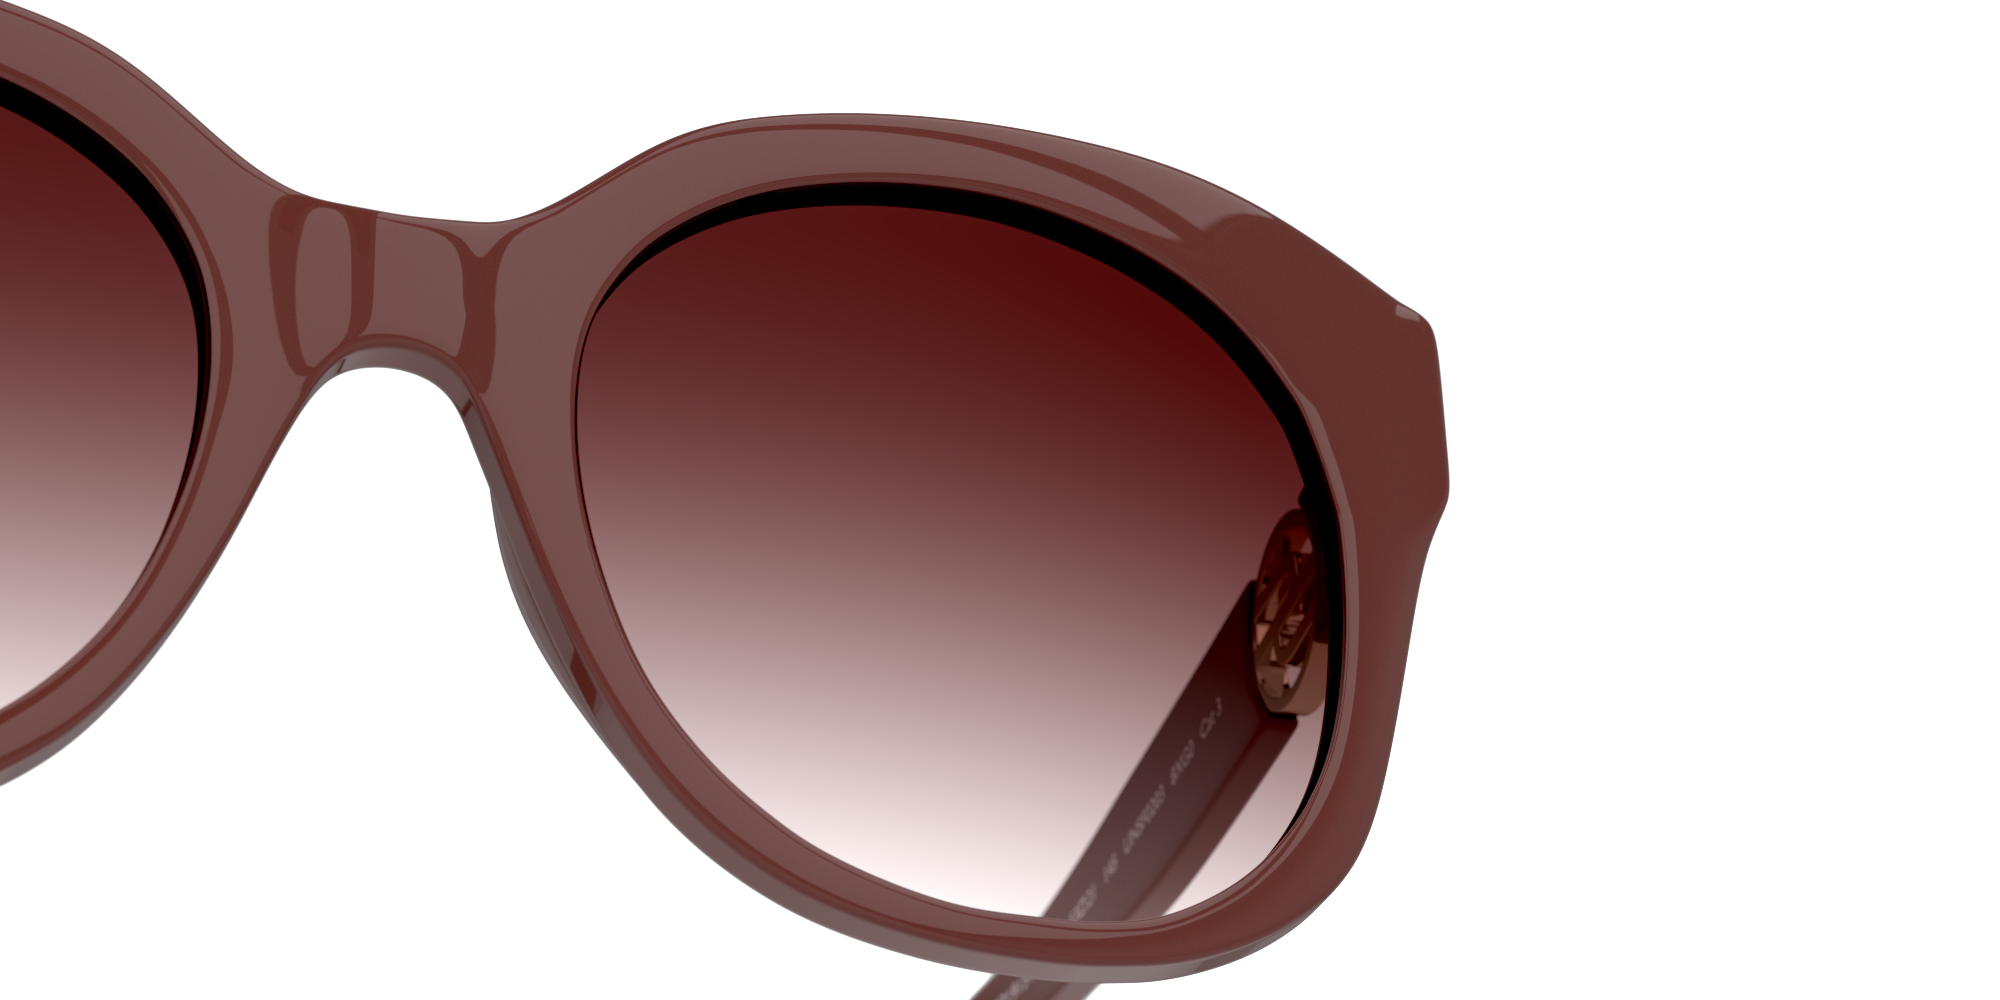 Detail01 Unofficial UNSF0203P Sunglasses Brown / Red